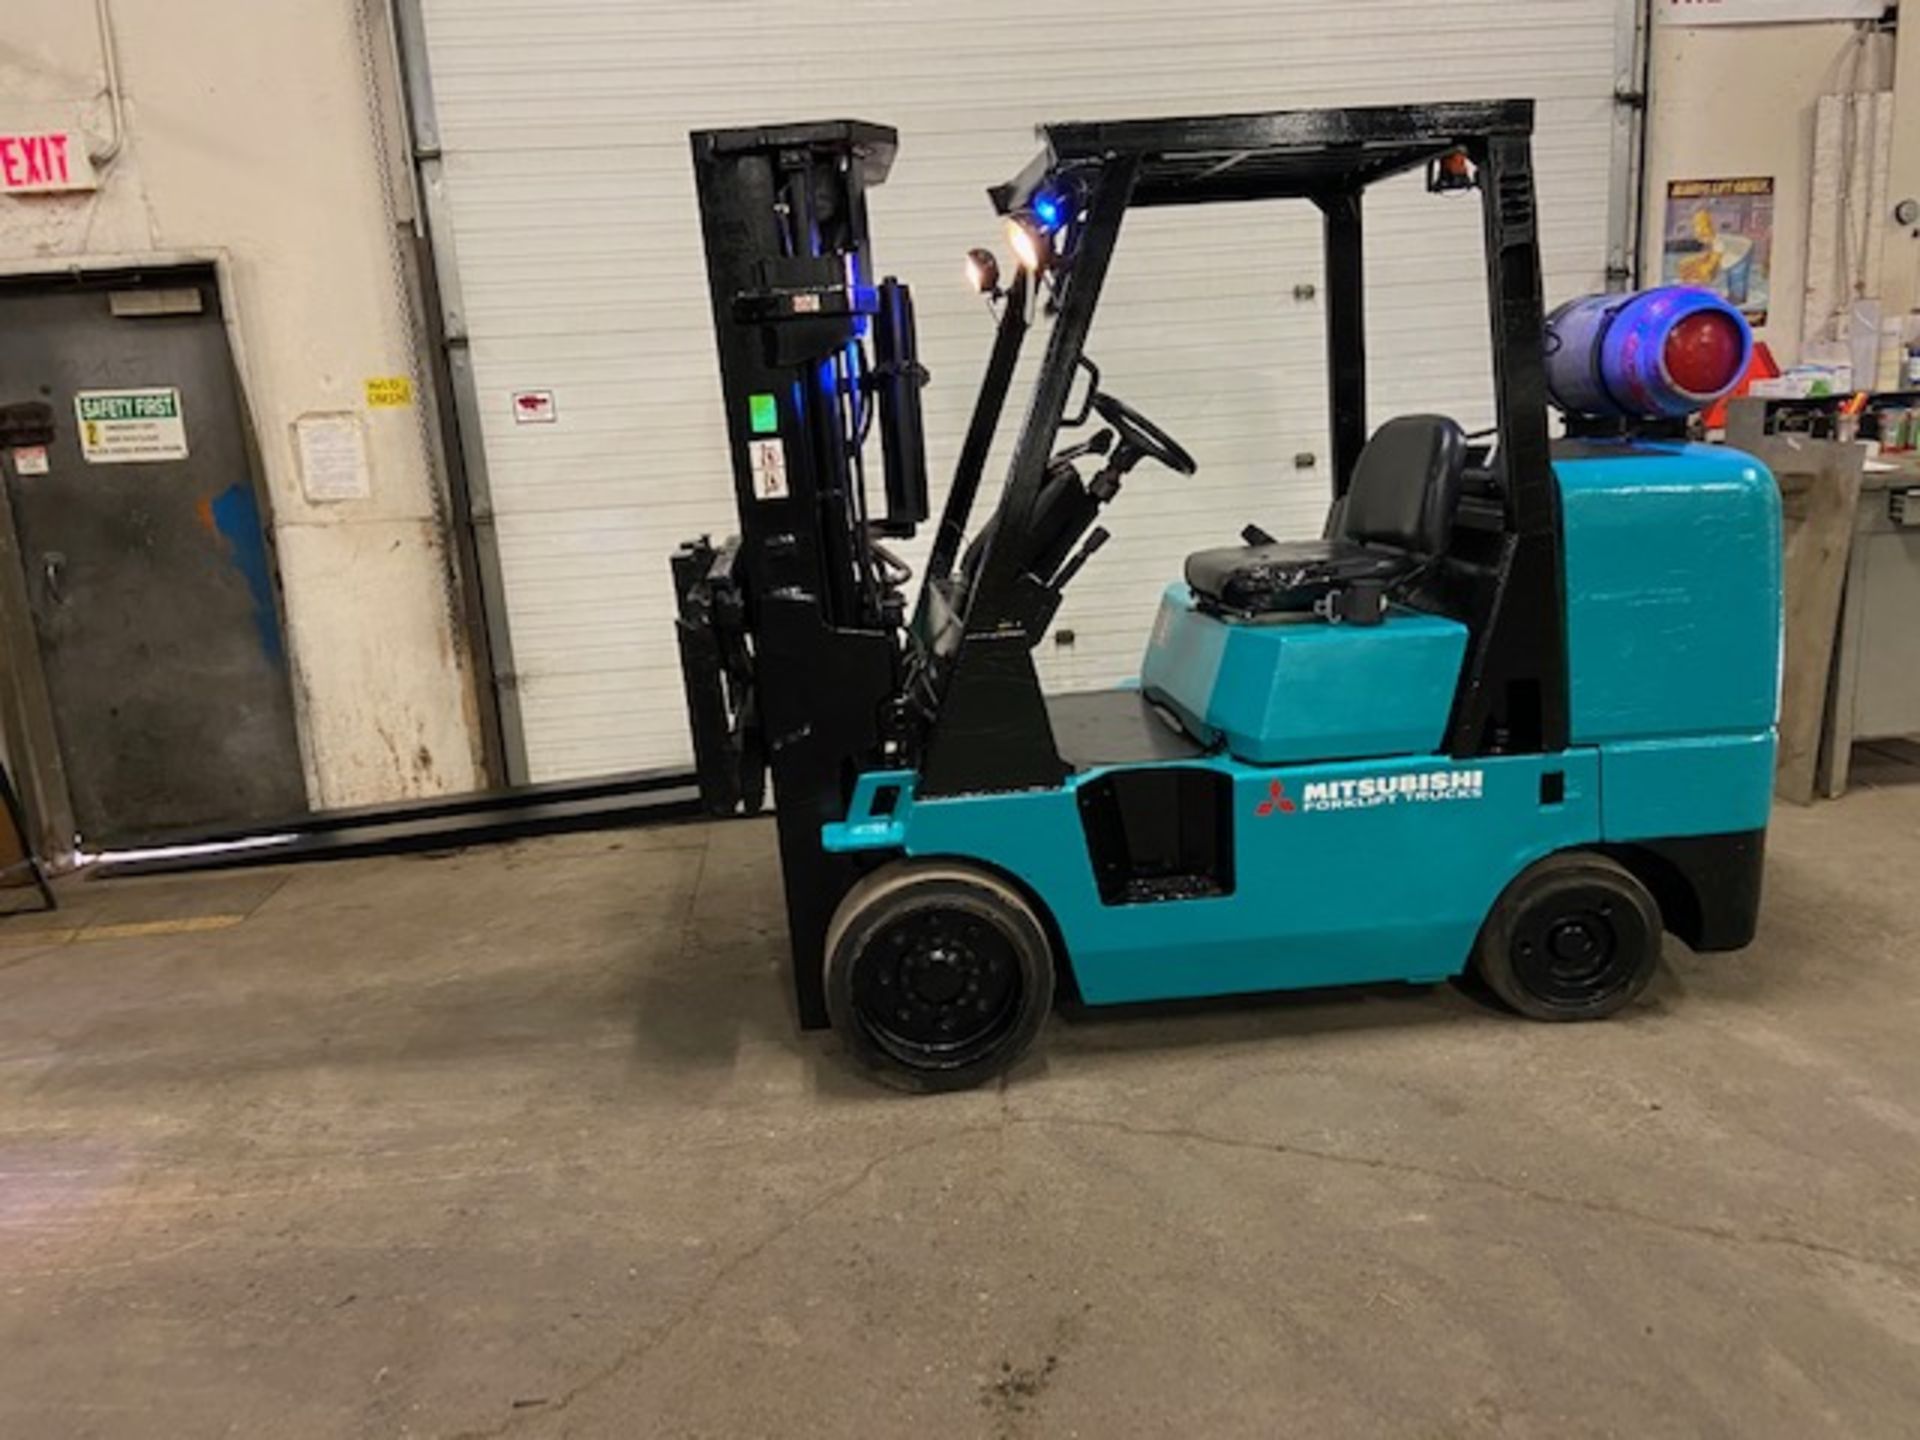 FREE CUSTOMS - Mitsubishi 10000lbs capacity LPG (propane) Forklift with 3-stage mast and sideshift